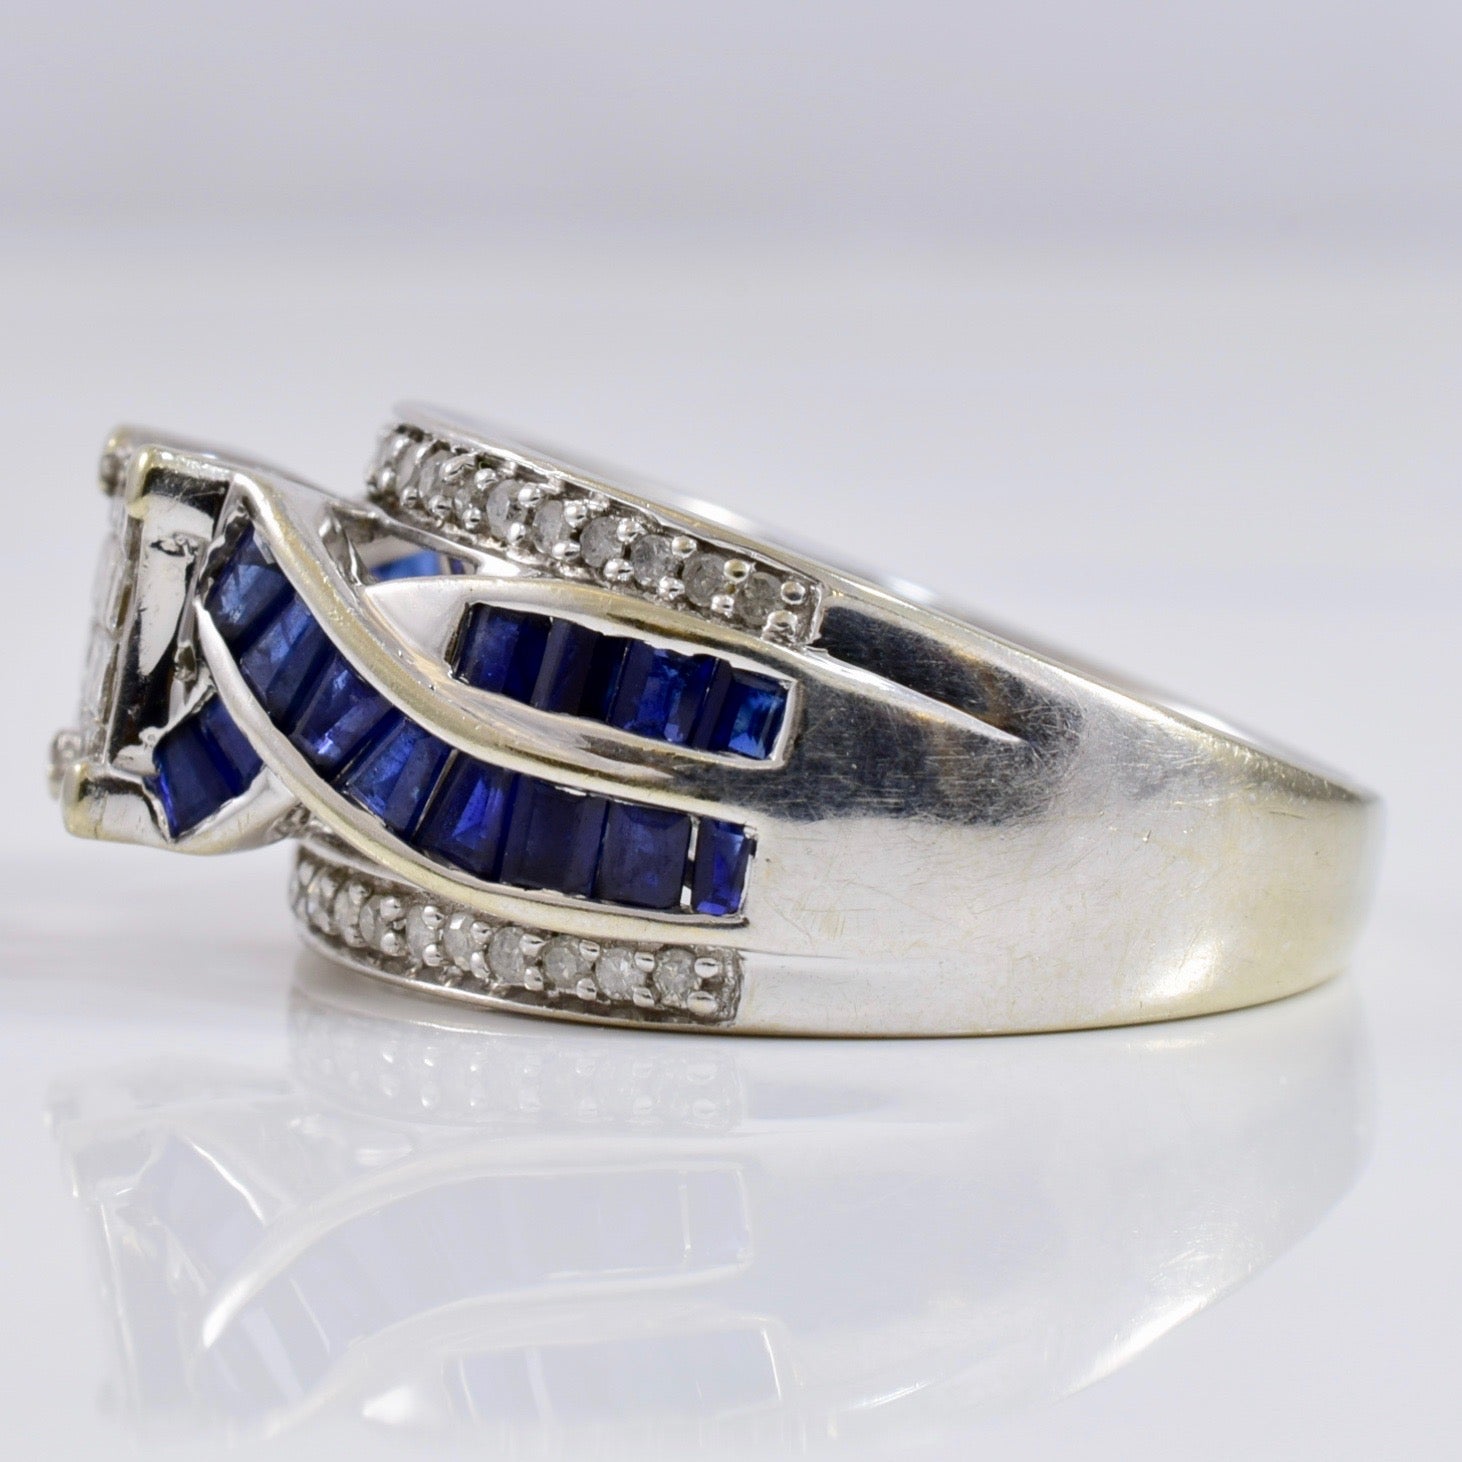 Diamond Cluster Ring with Sapphire Accents | 0.50 ctw SZ 6.75 |